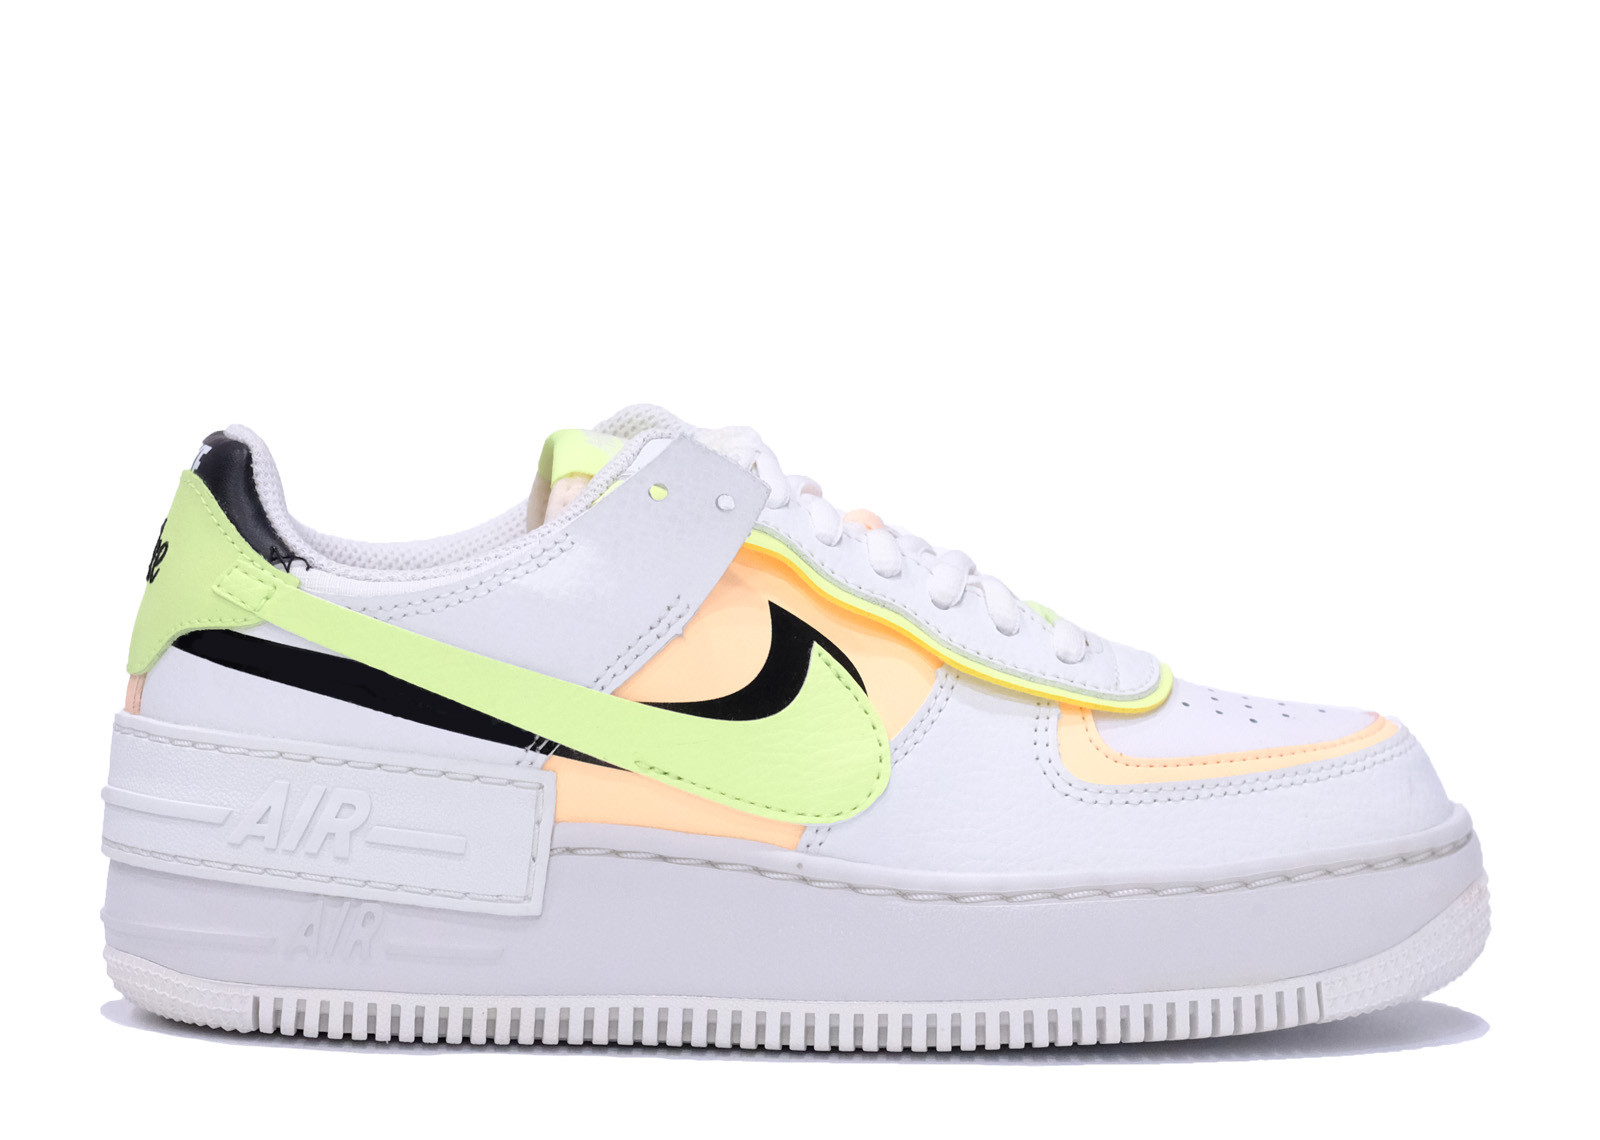 AIR FORCE 1 SHADOW BARELY VOLT CRIMSON TINT (W) image 1